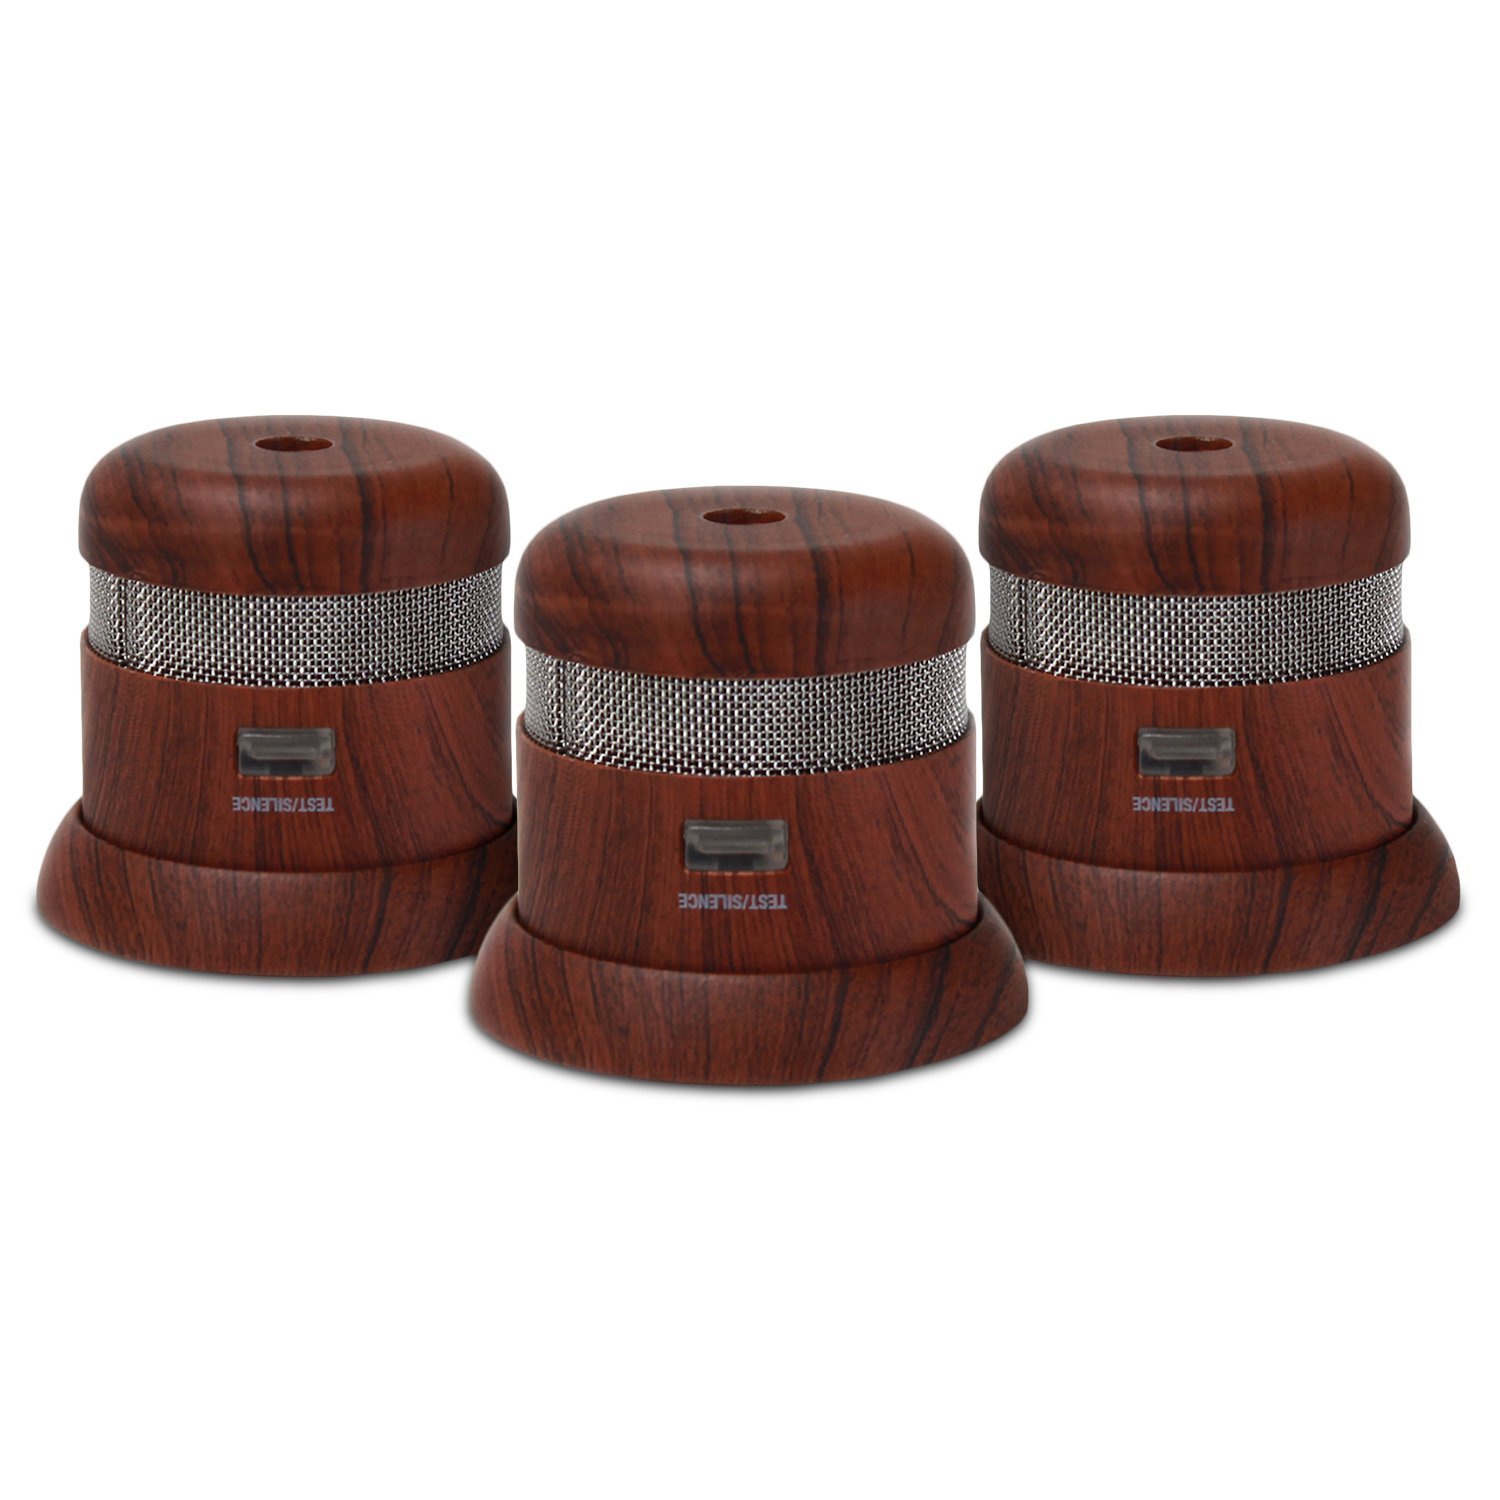 First Alert Atom Micro Photoelectric Smoke Alarm in Cherry Wood Finish, 3 Pack - P1000-CH-3